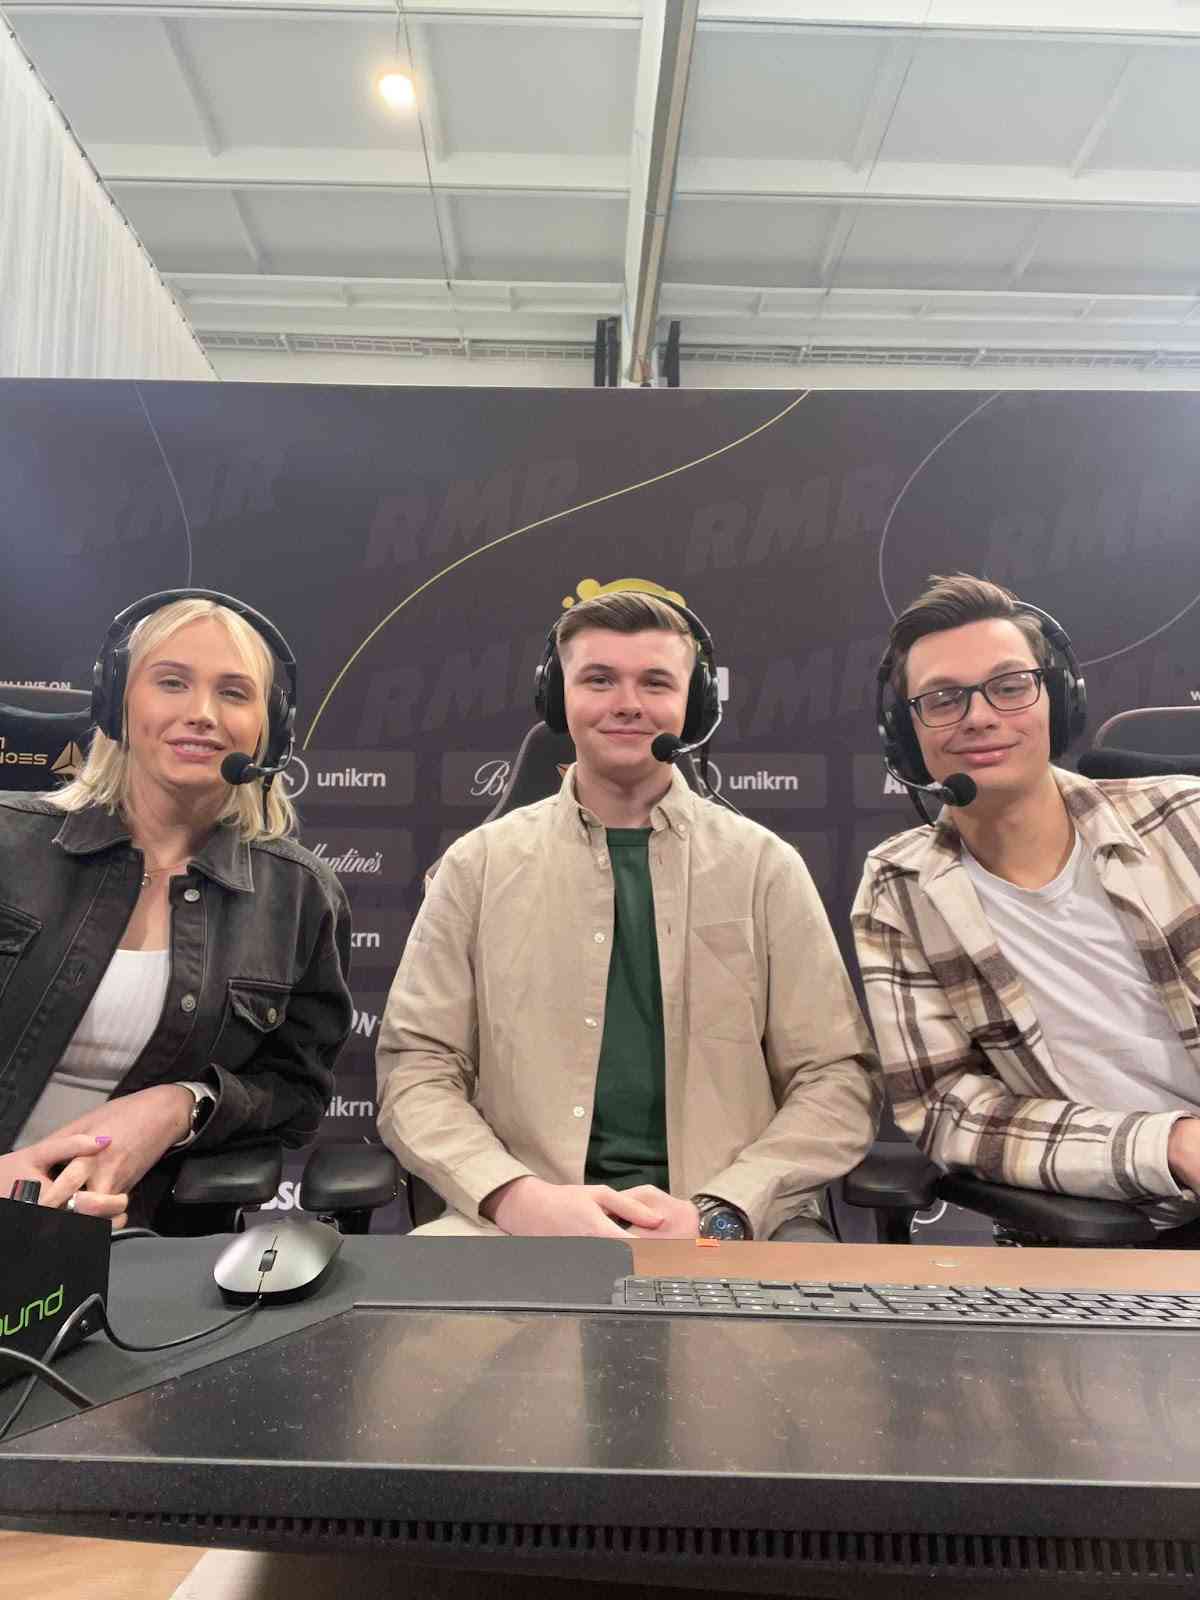 Lucy with Adam “Dinko” Hawthorne and Alex “Hawka” Hawkins working the European RMRs for the Paris Major